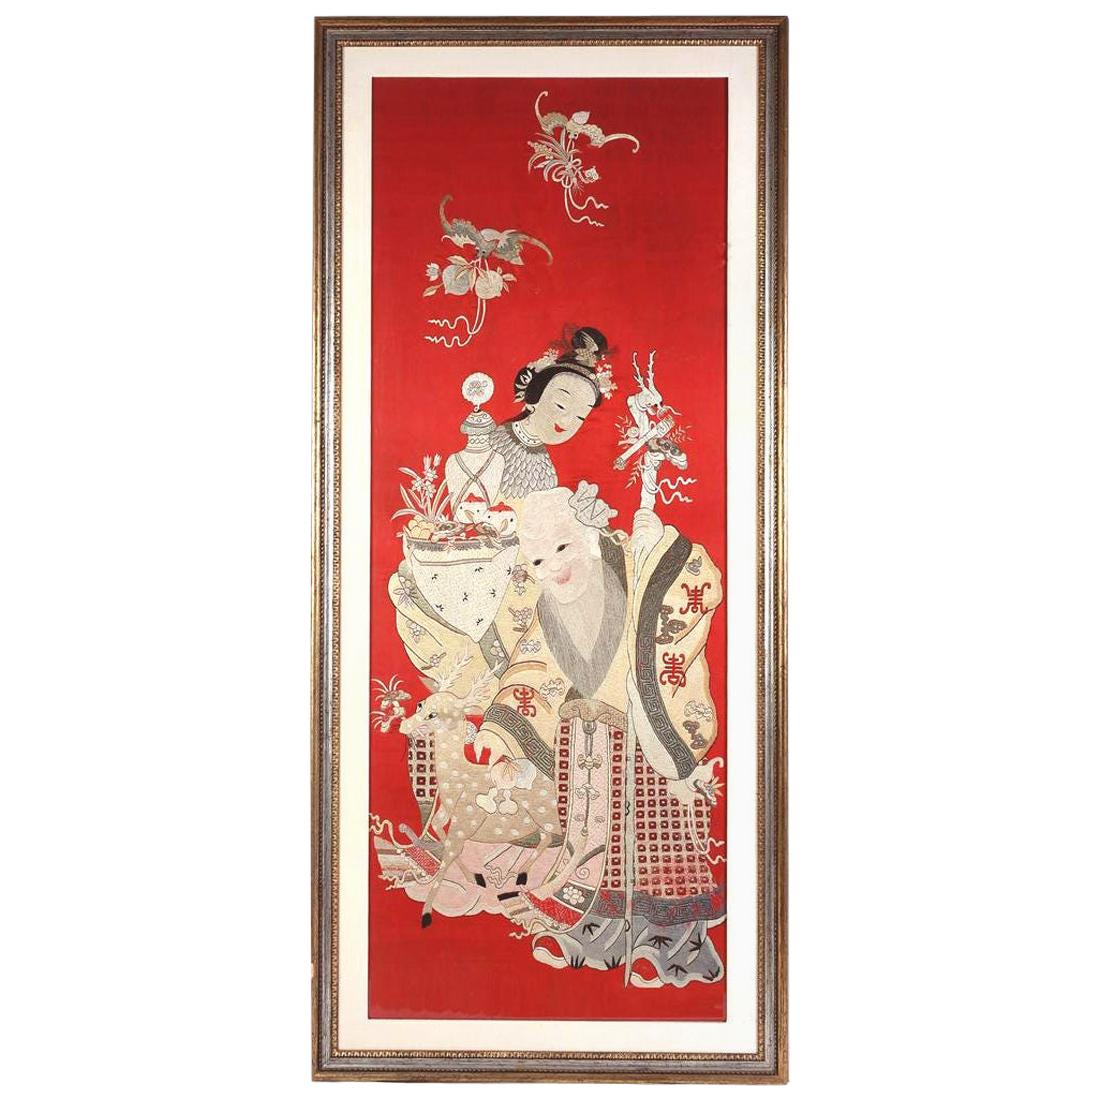 Framed Chinese Embroidery Panel of Longevity Deities